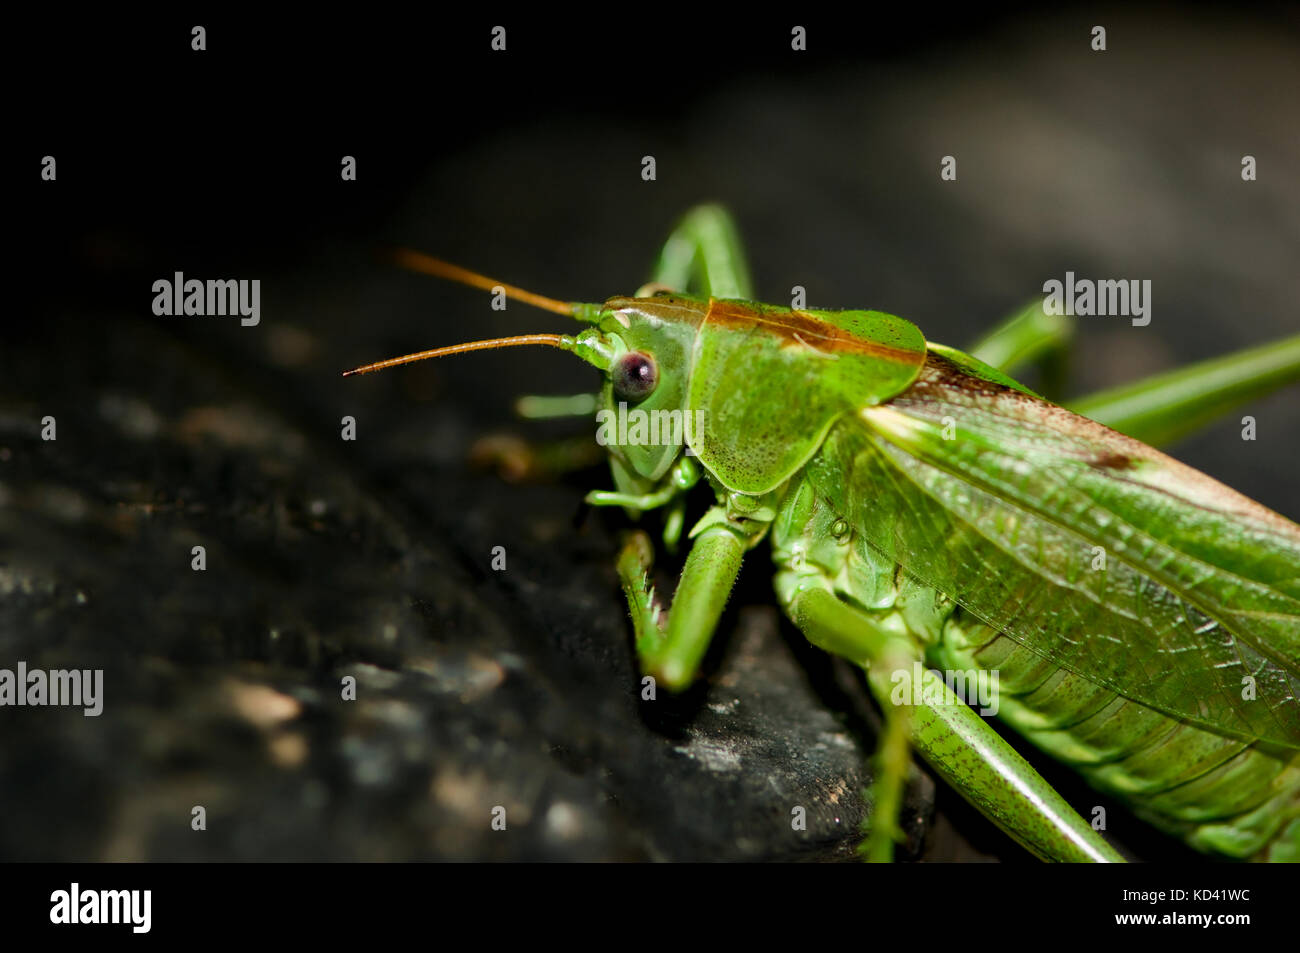 Emerald green grasshopper on black uneven surface. From rear with legs, wings, antenna and left eye visible. Details. Copy space Stock Photo